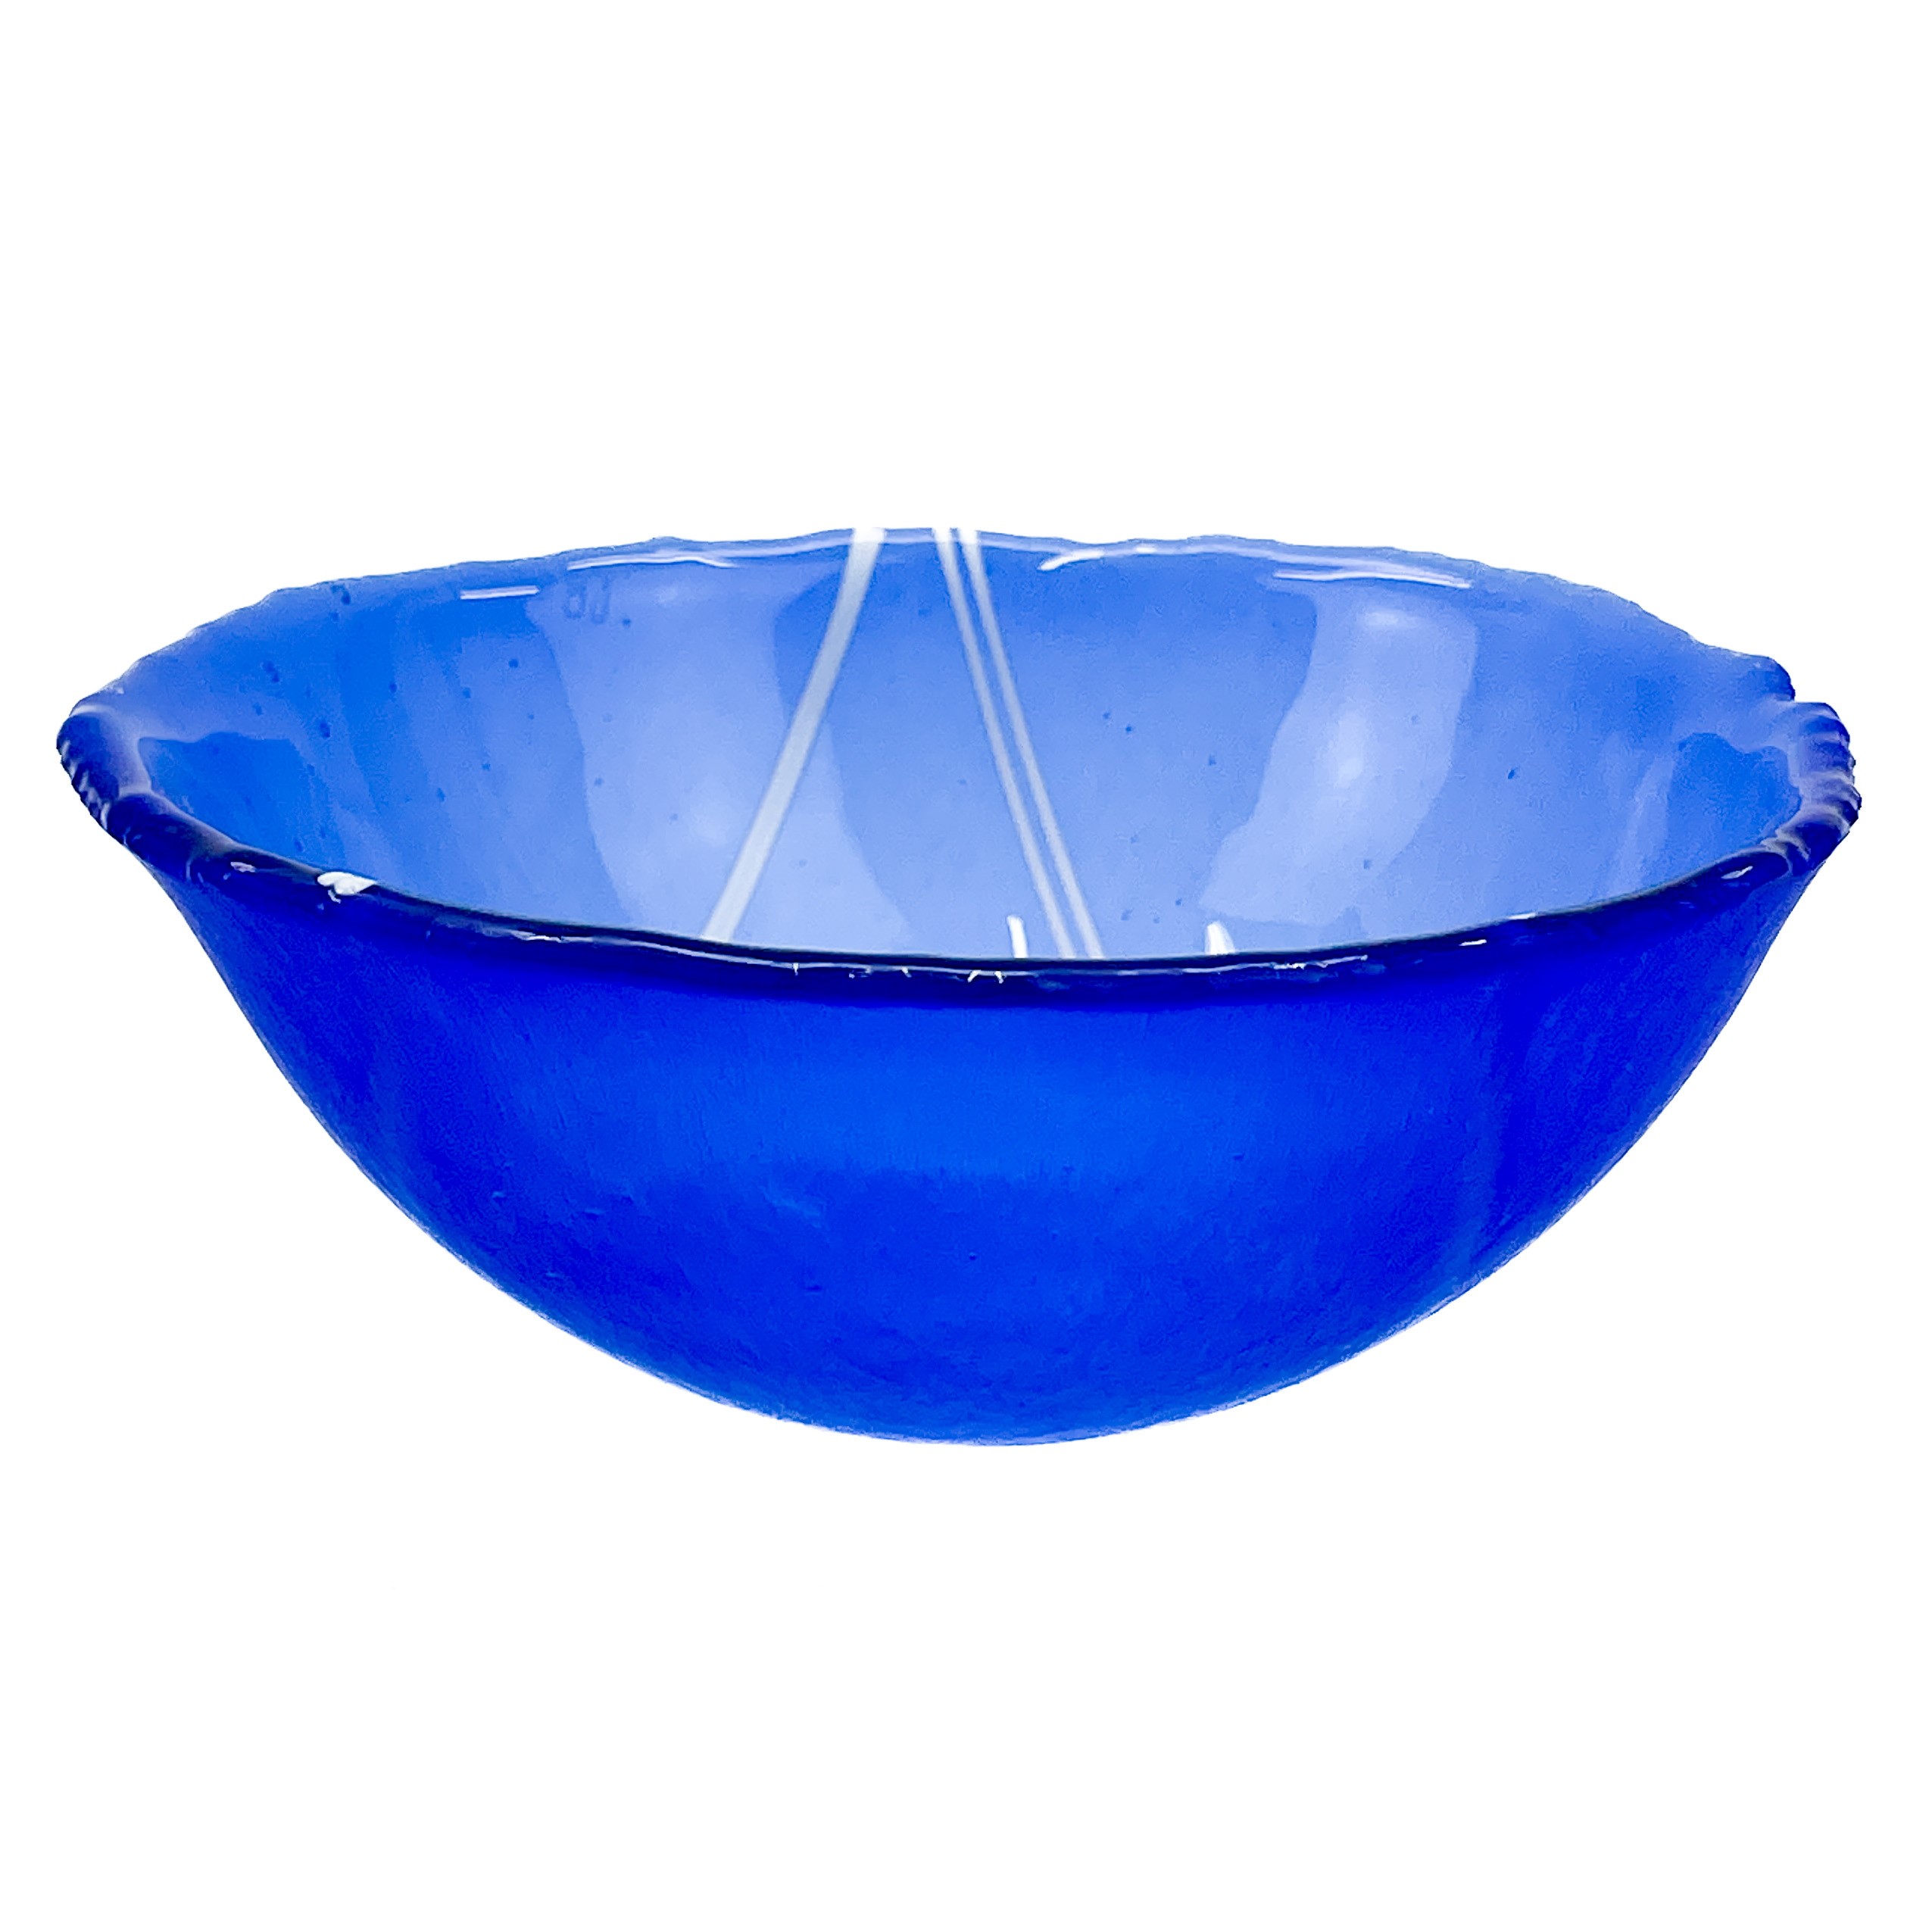 Serena RADCLIFFE Eight Glass Art Bowls - Image 18 of 18